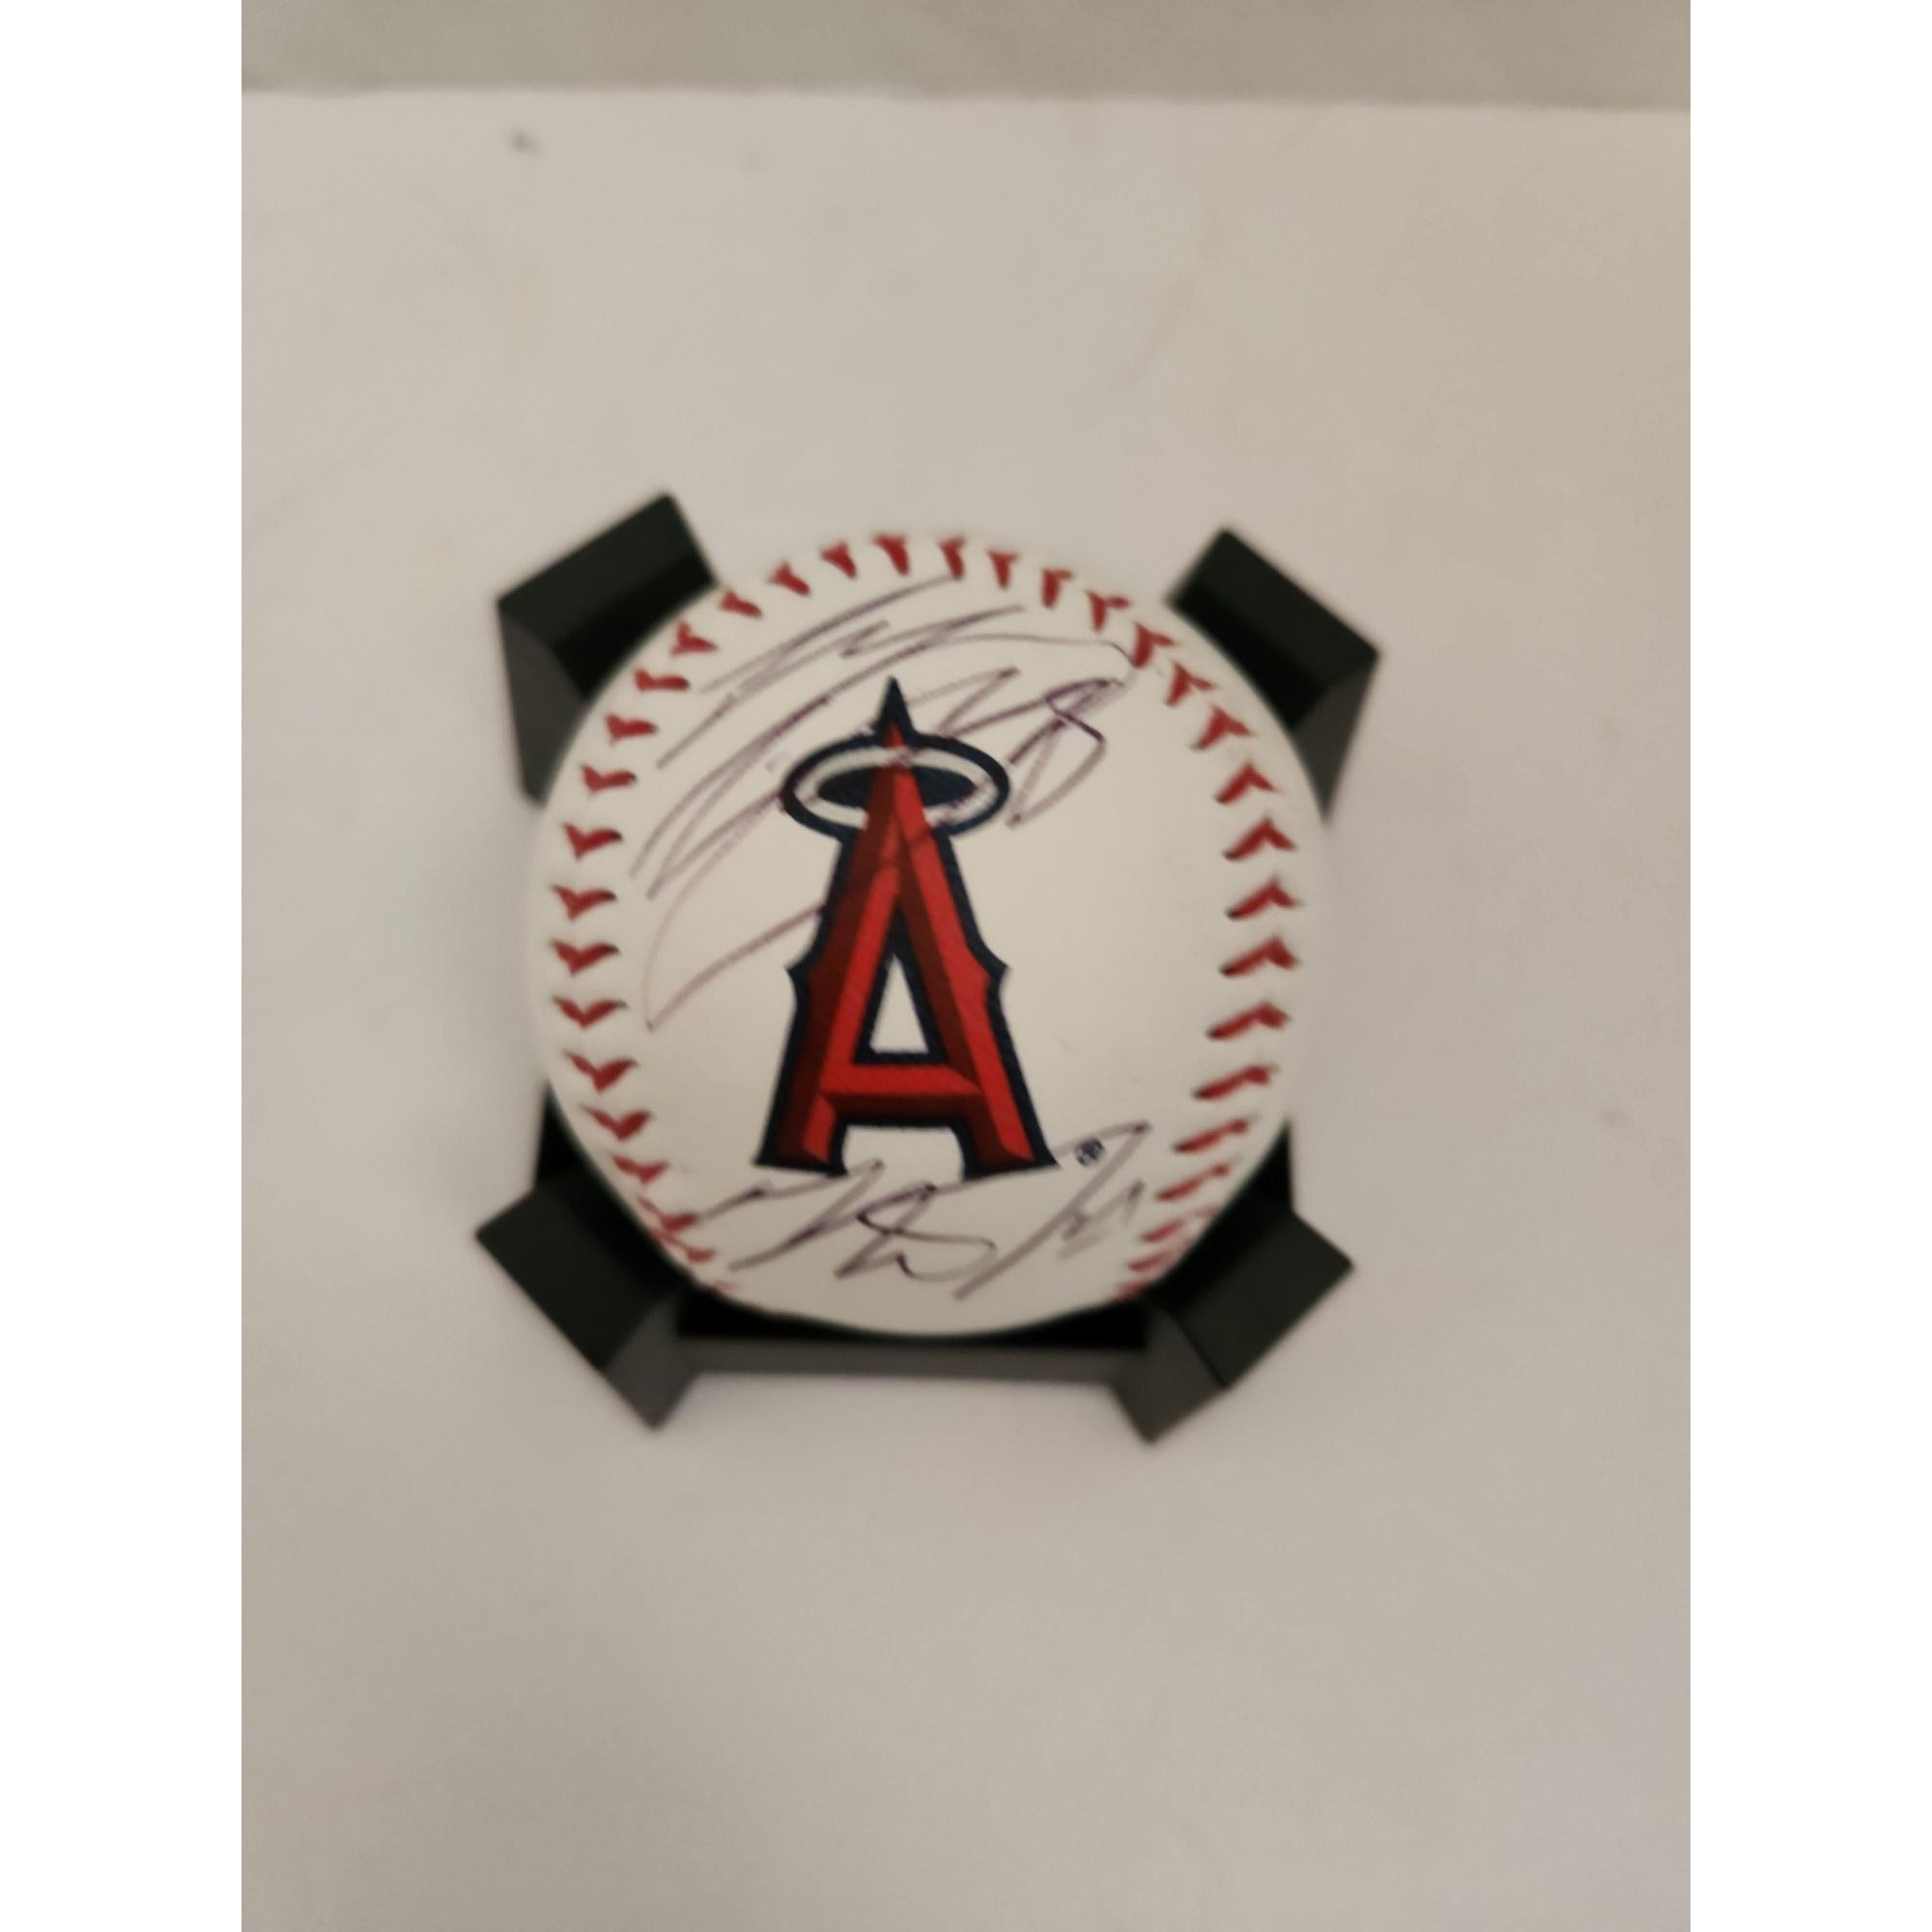 Mike Trout and Shohei Ohtani Los Angeles Angels Rawlings Baseball signed with proof